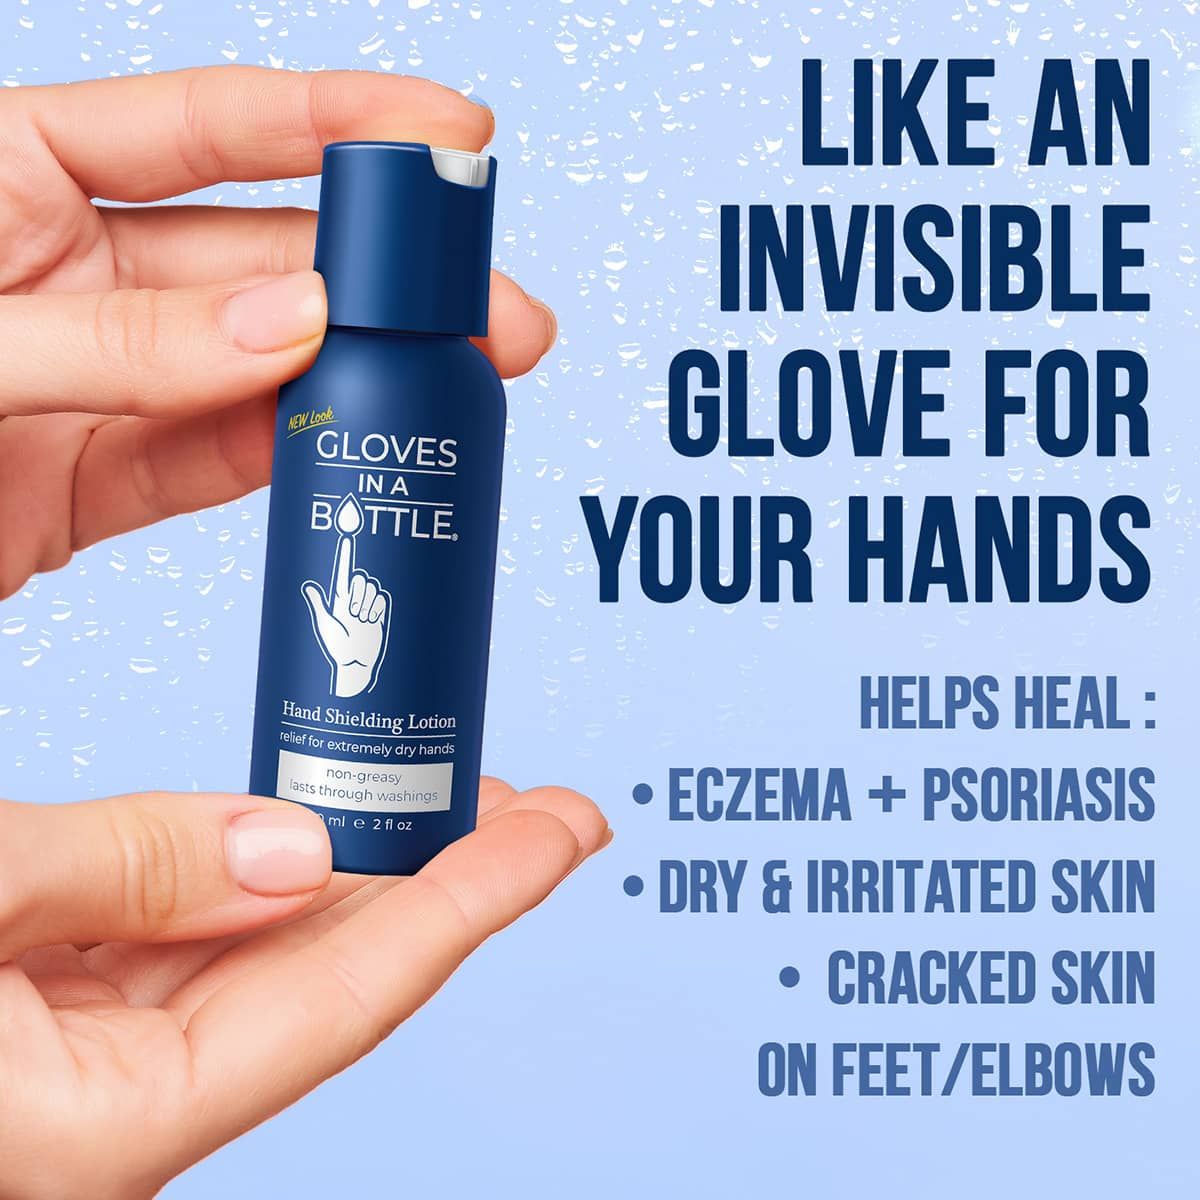 Relieve Contact Dermatitis with Gloves In A Bottle (Shielding Lotion)